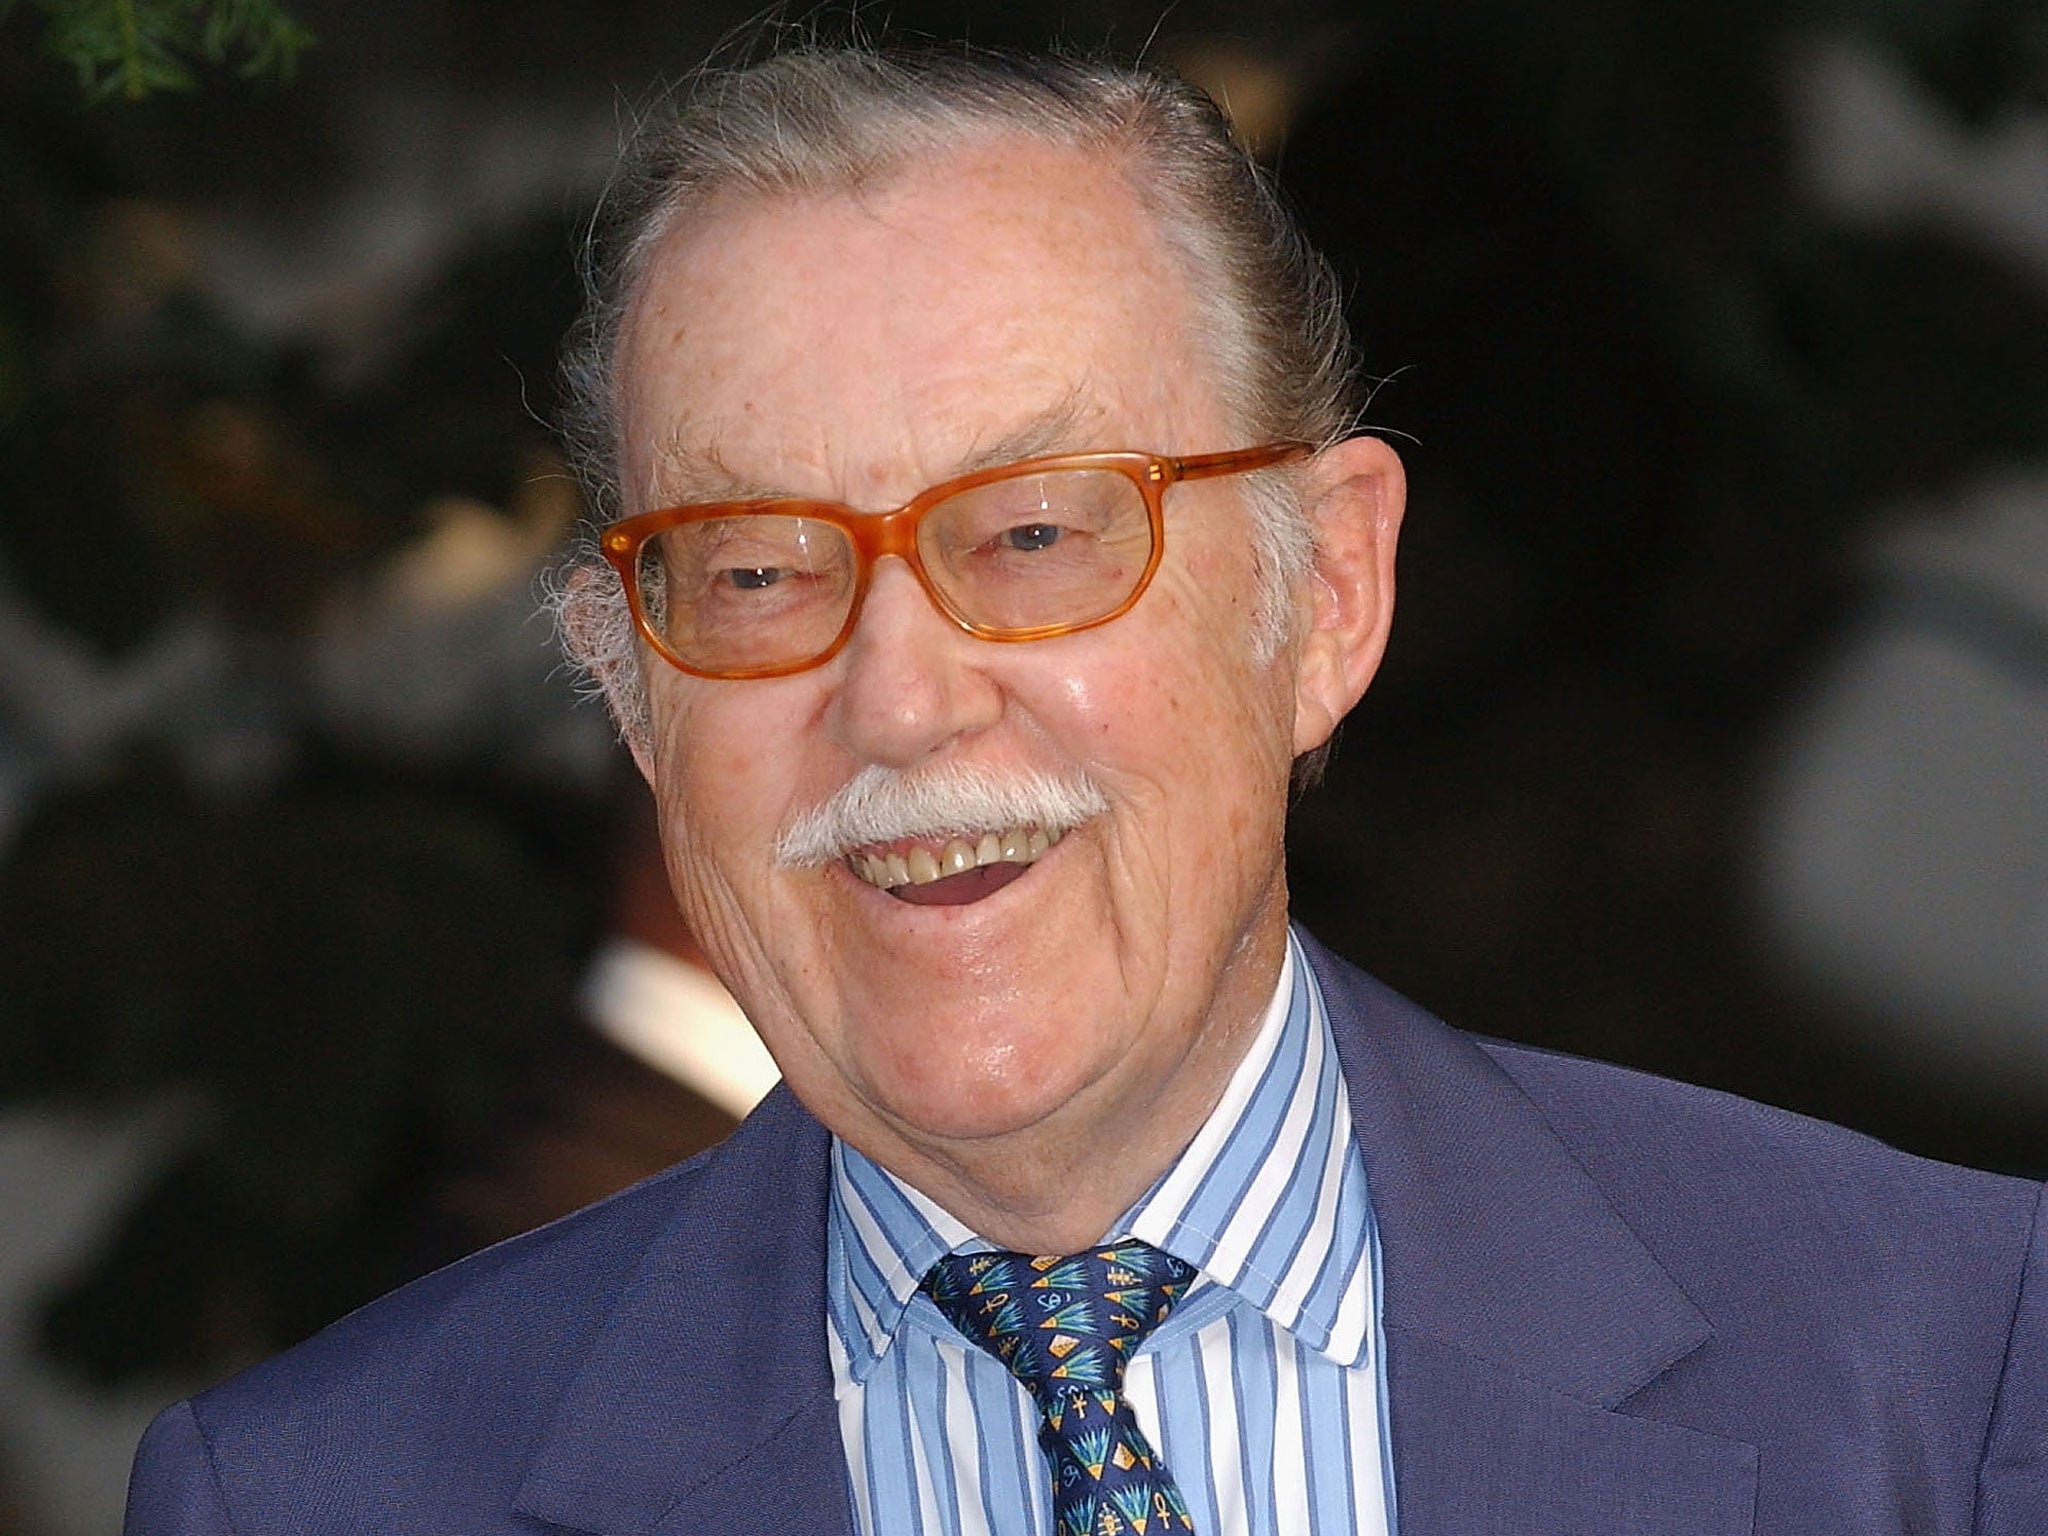 The broadcaster Alan Whicker has died, aged 87